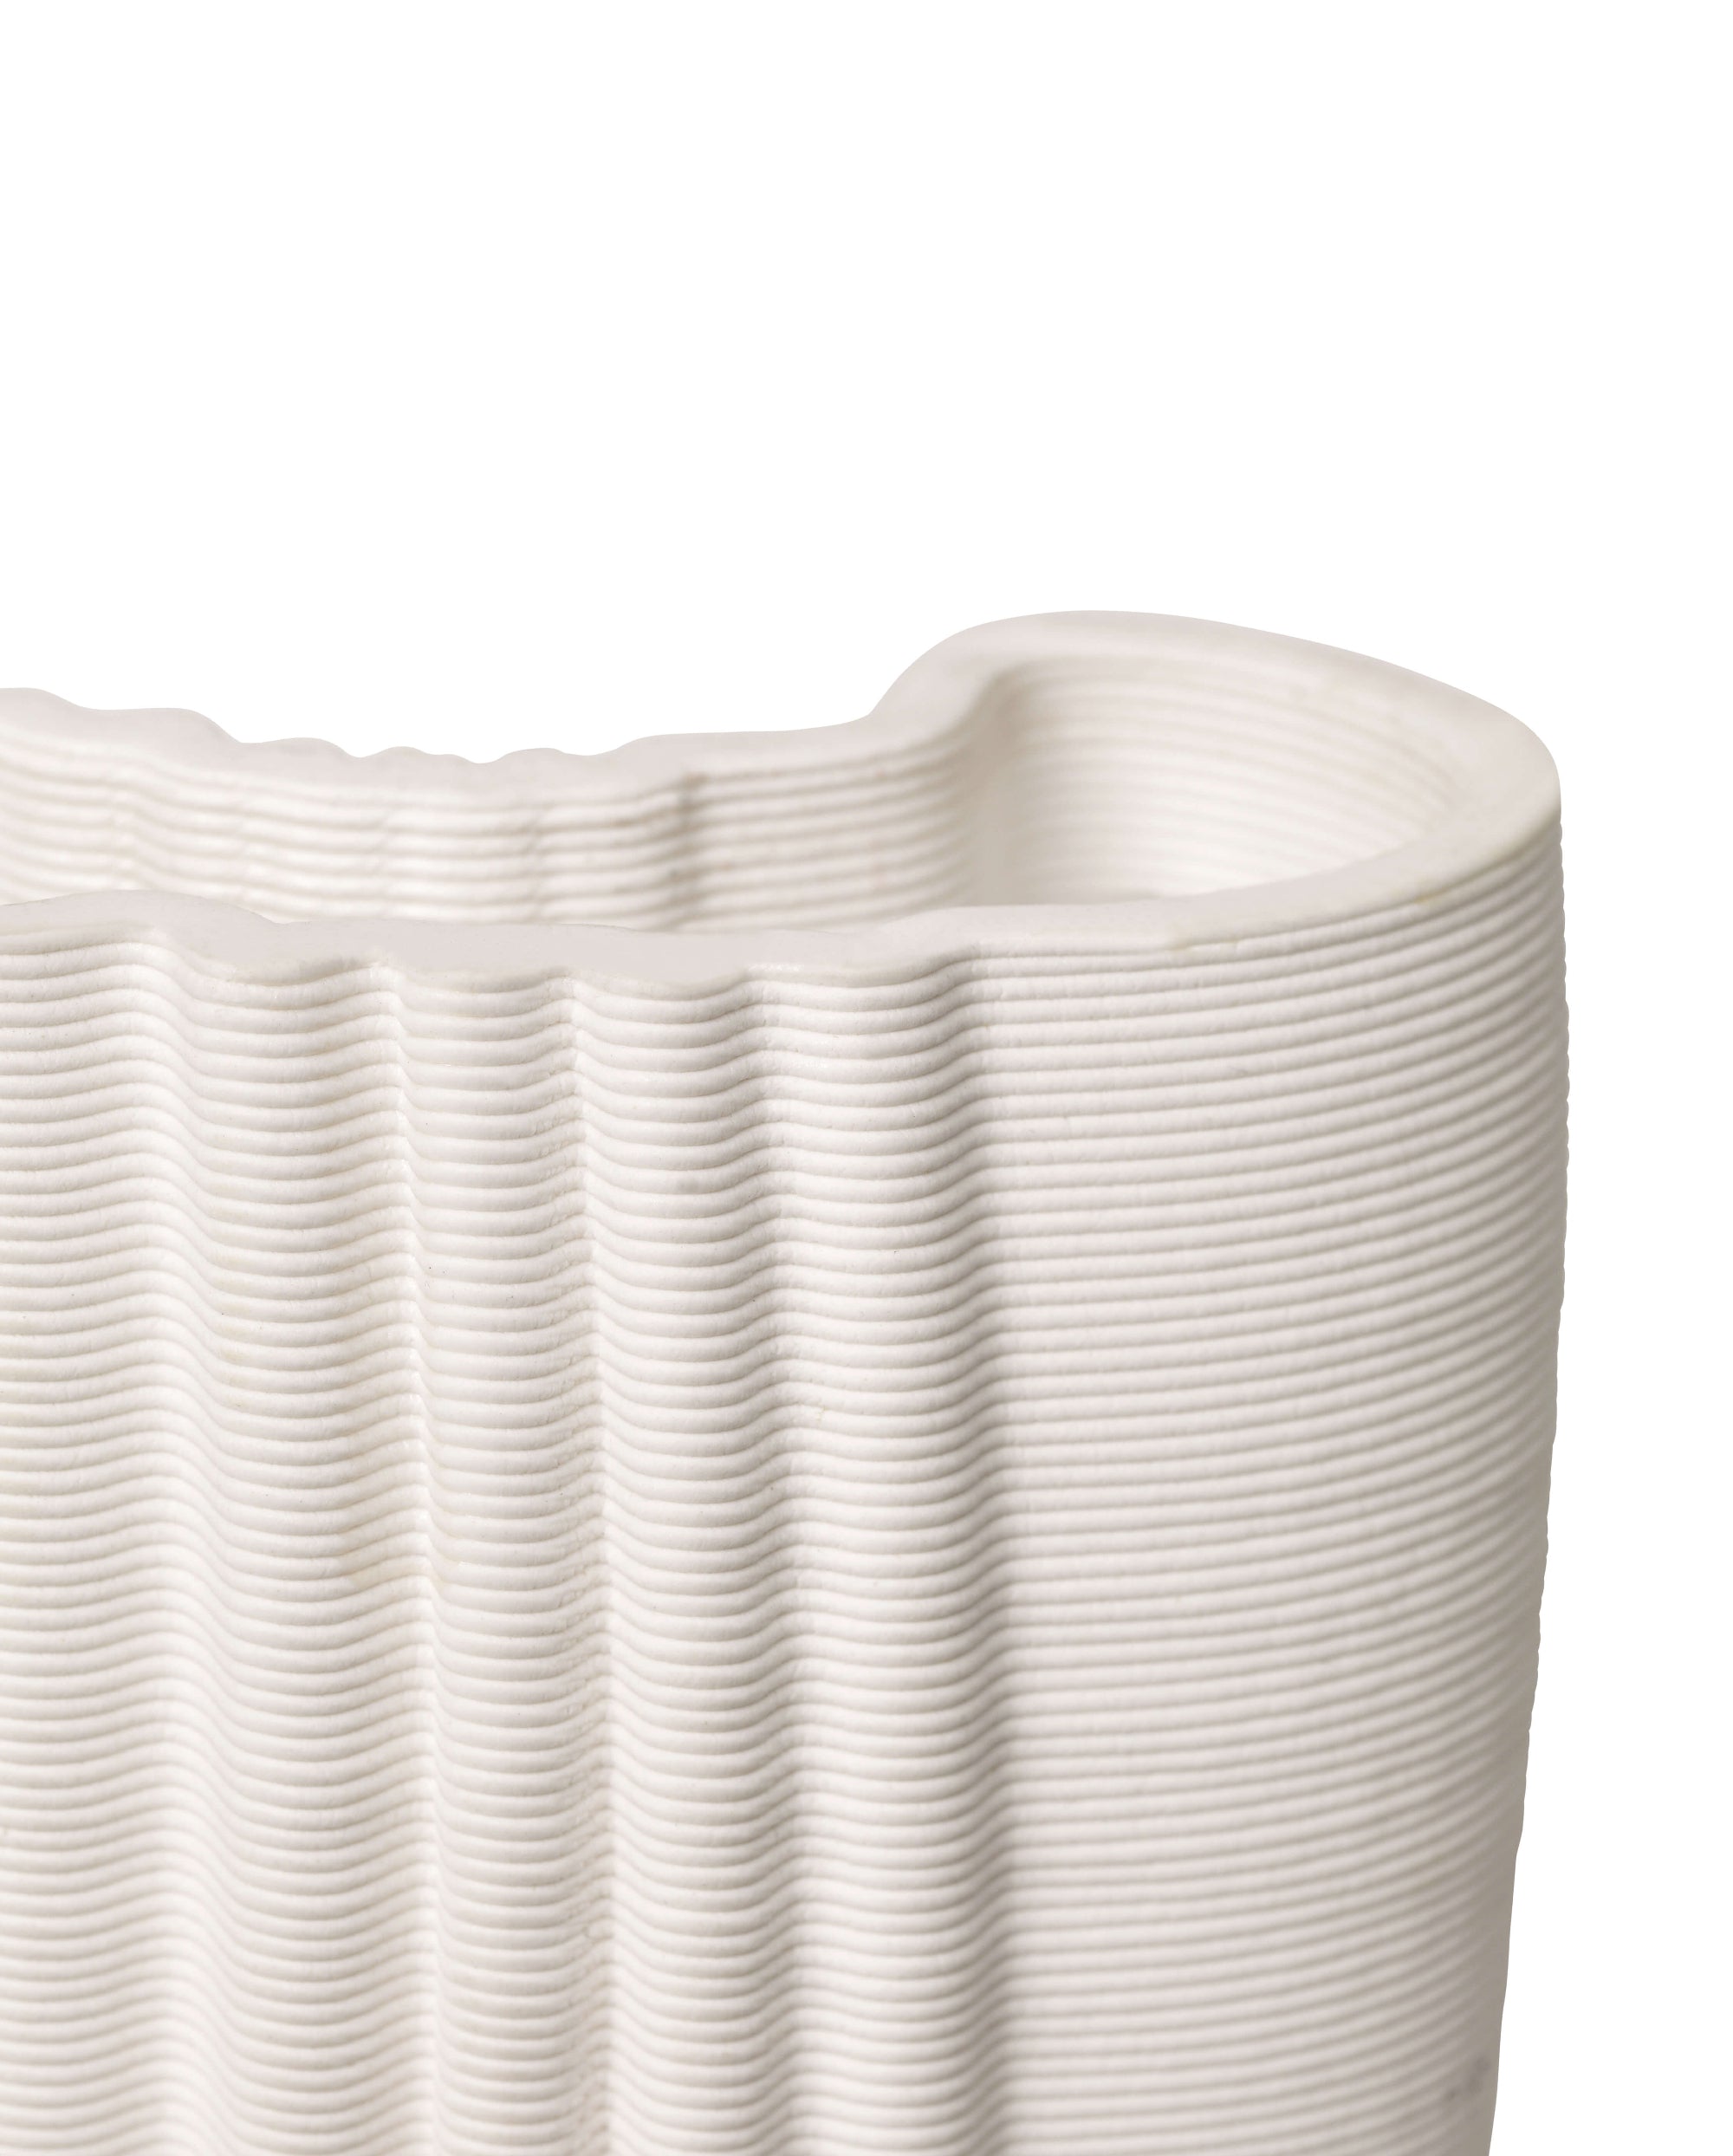 Moire Vase | Off-White | 3D Printed Clay | by ferm Living - Lifestory - ferm LIVING